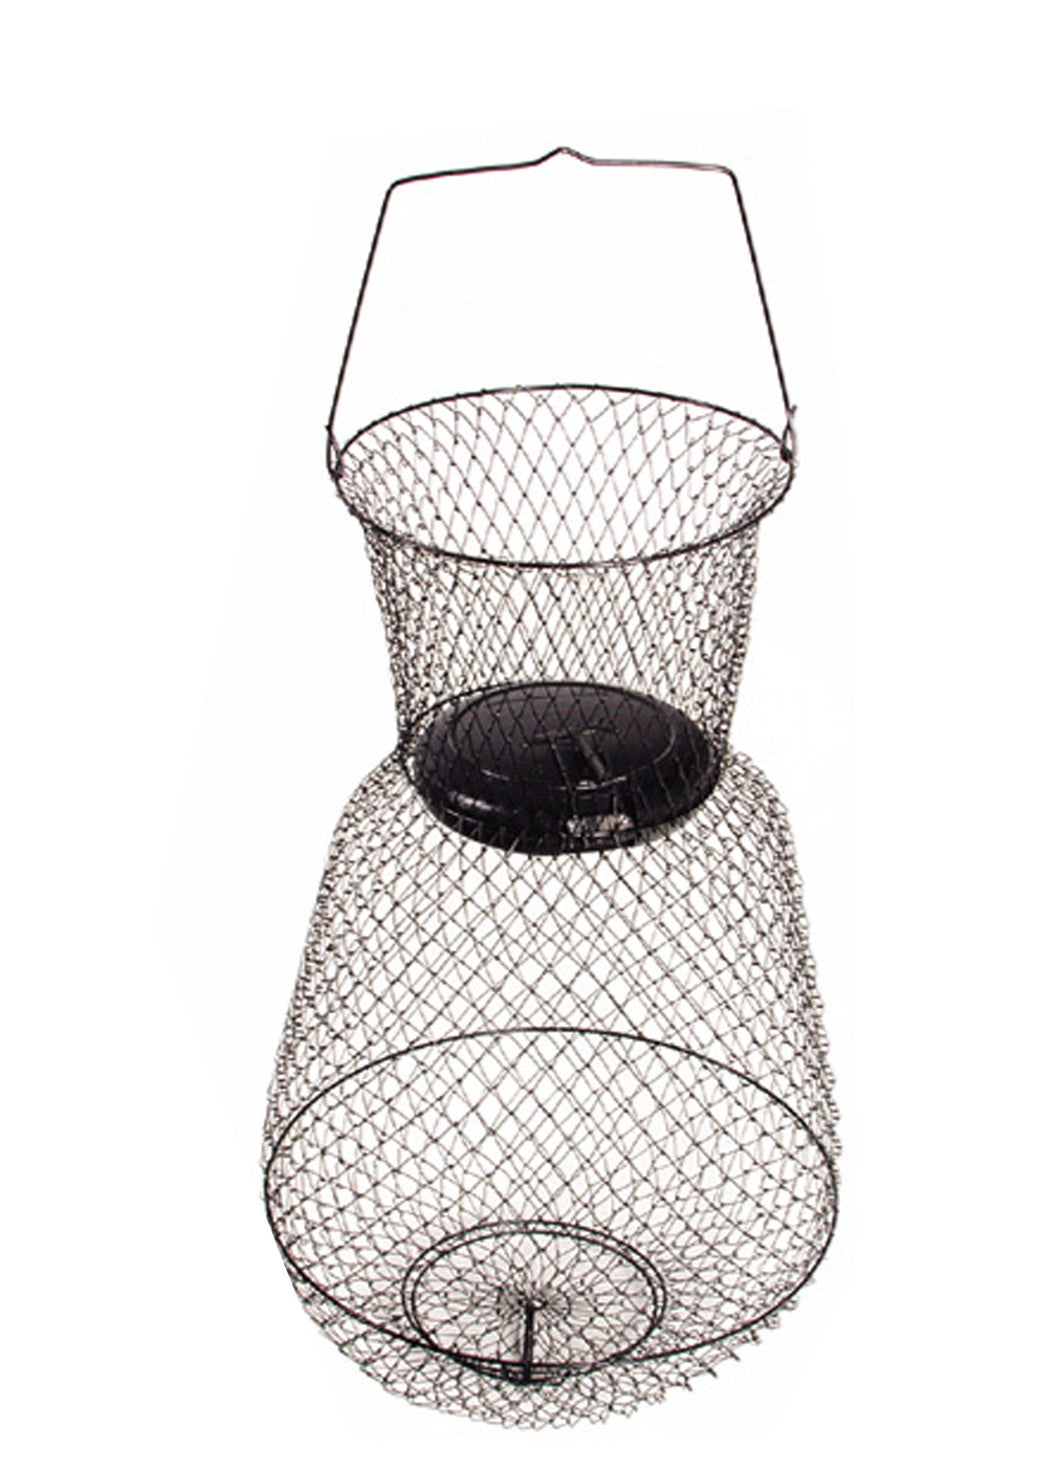 Promar Floating Wire Fish Baskets